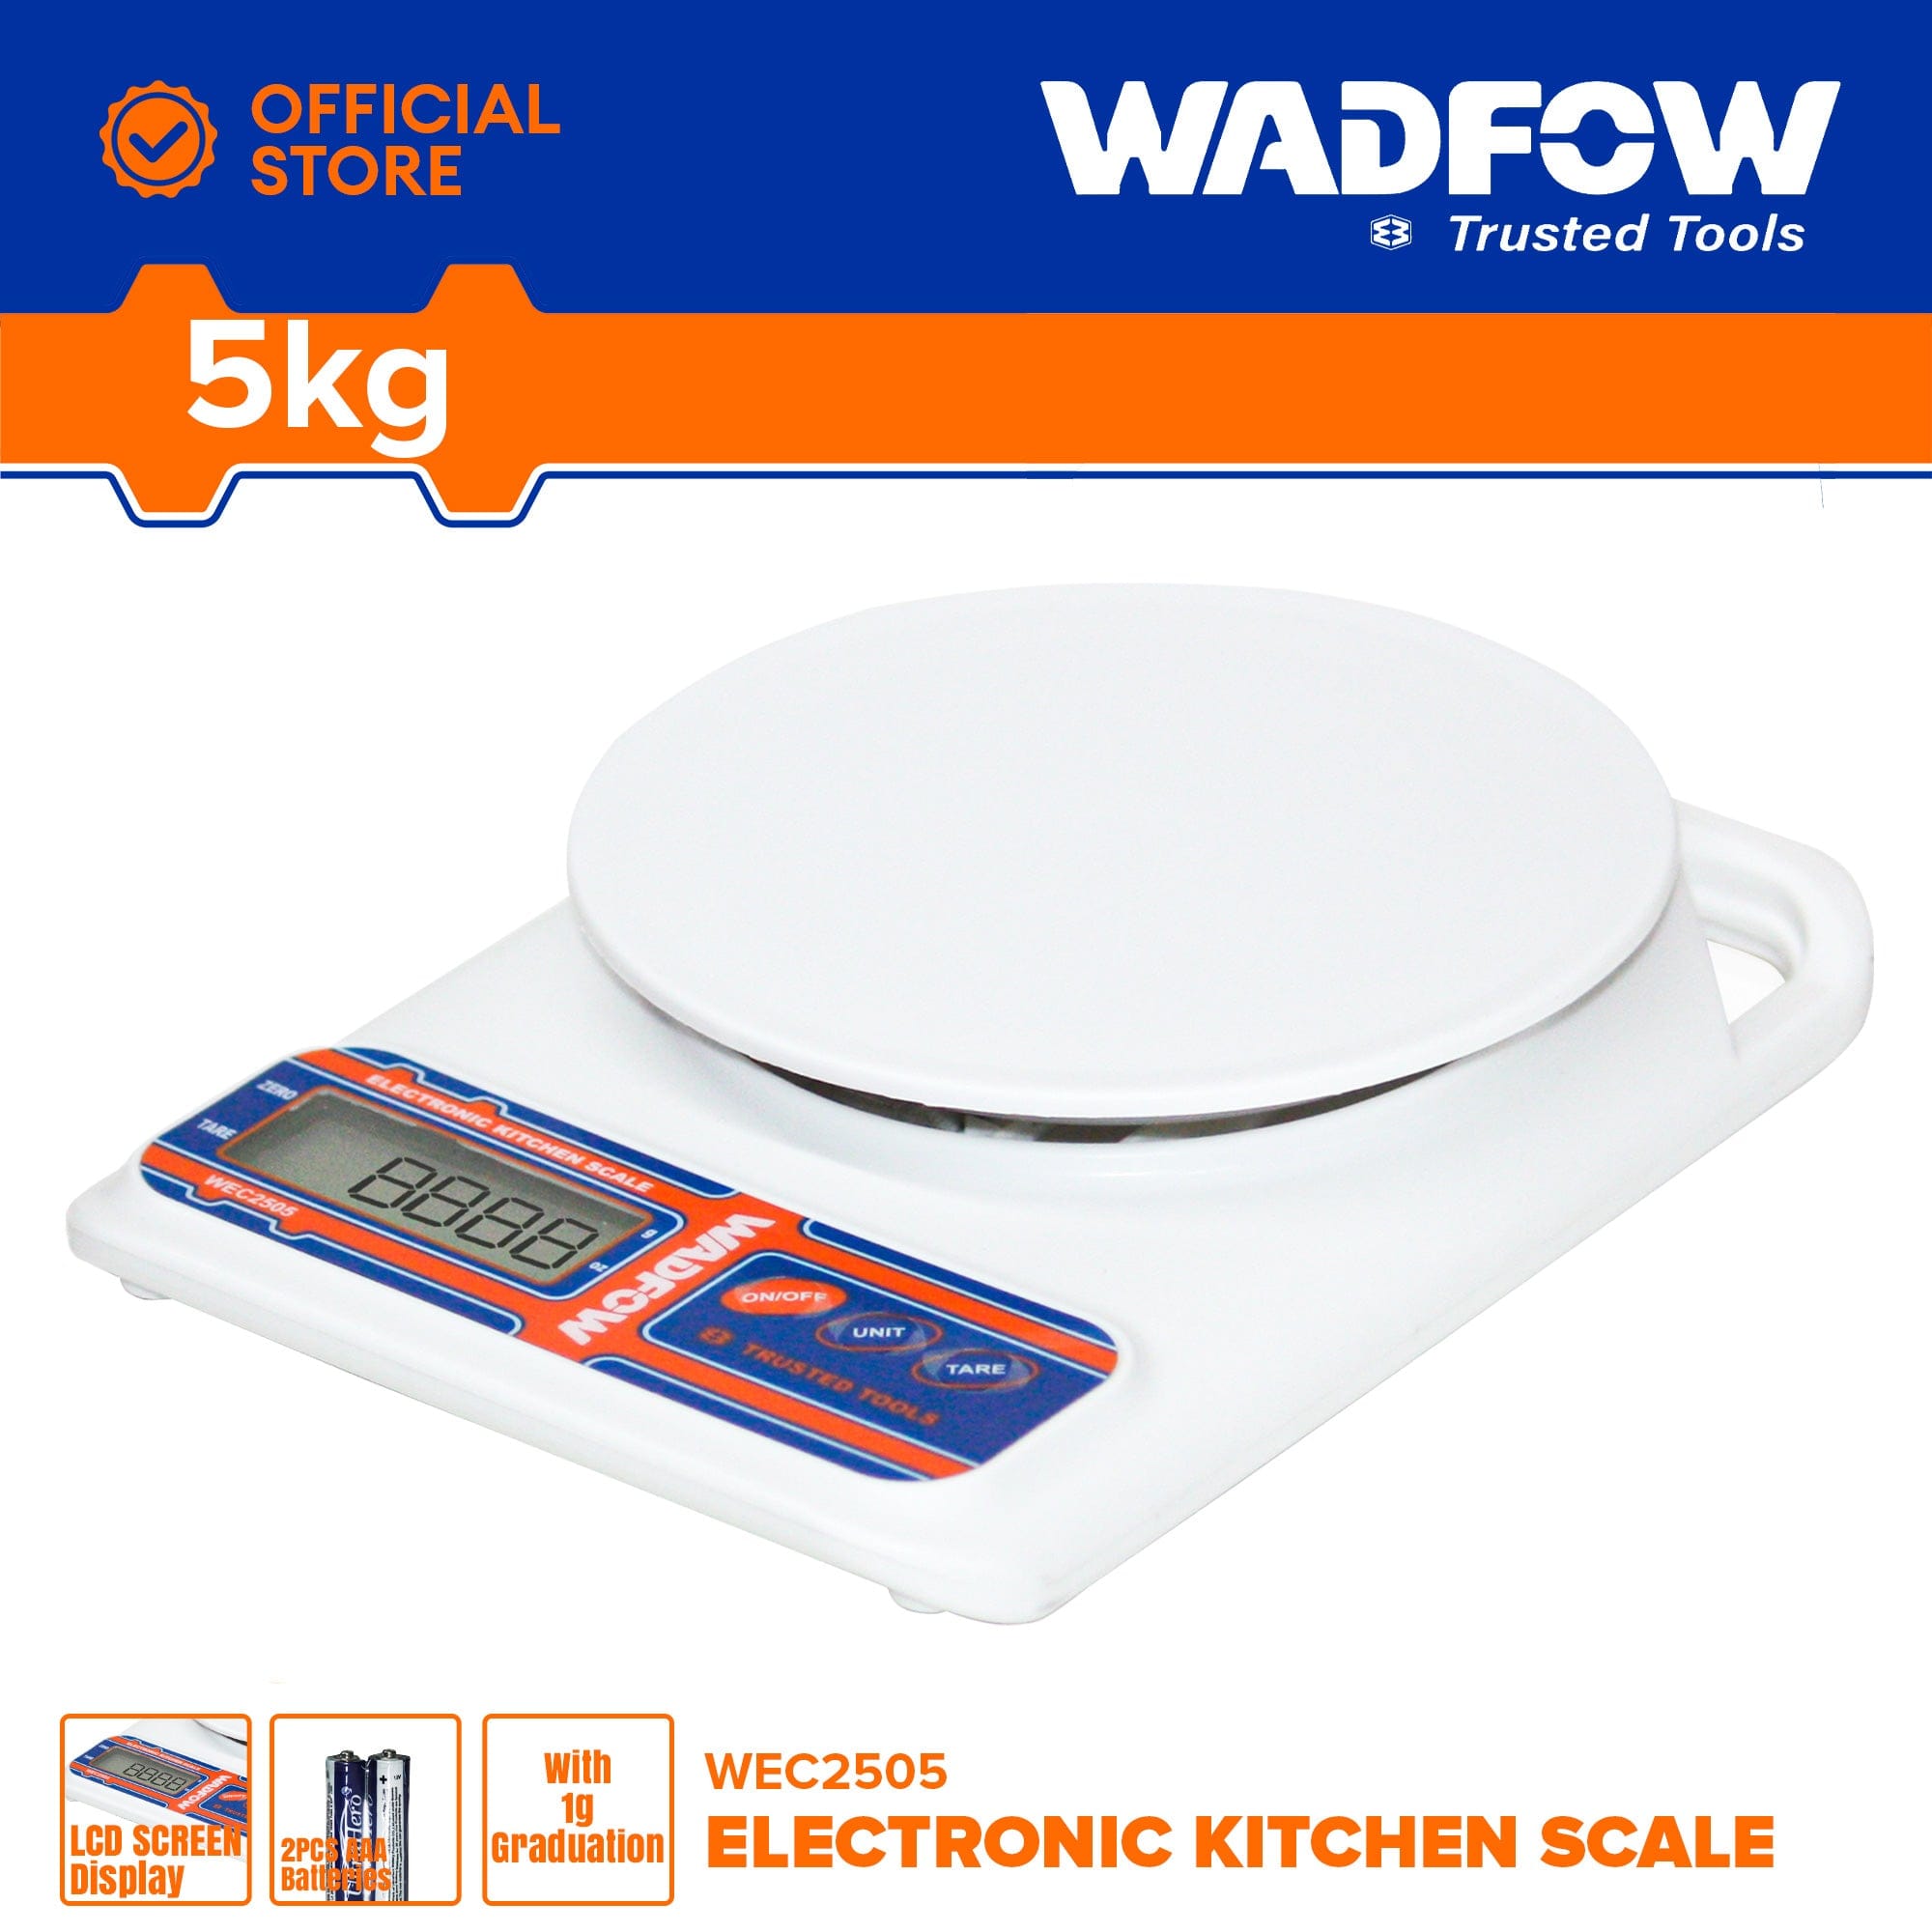 Buy Wadfow Electronic Kitchen Scale 5Kg (WEC2505) in Accra, Ghana | Supply Master Digital Meter Buy Tools hardware Building materials